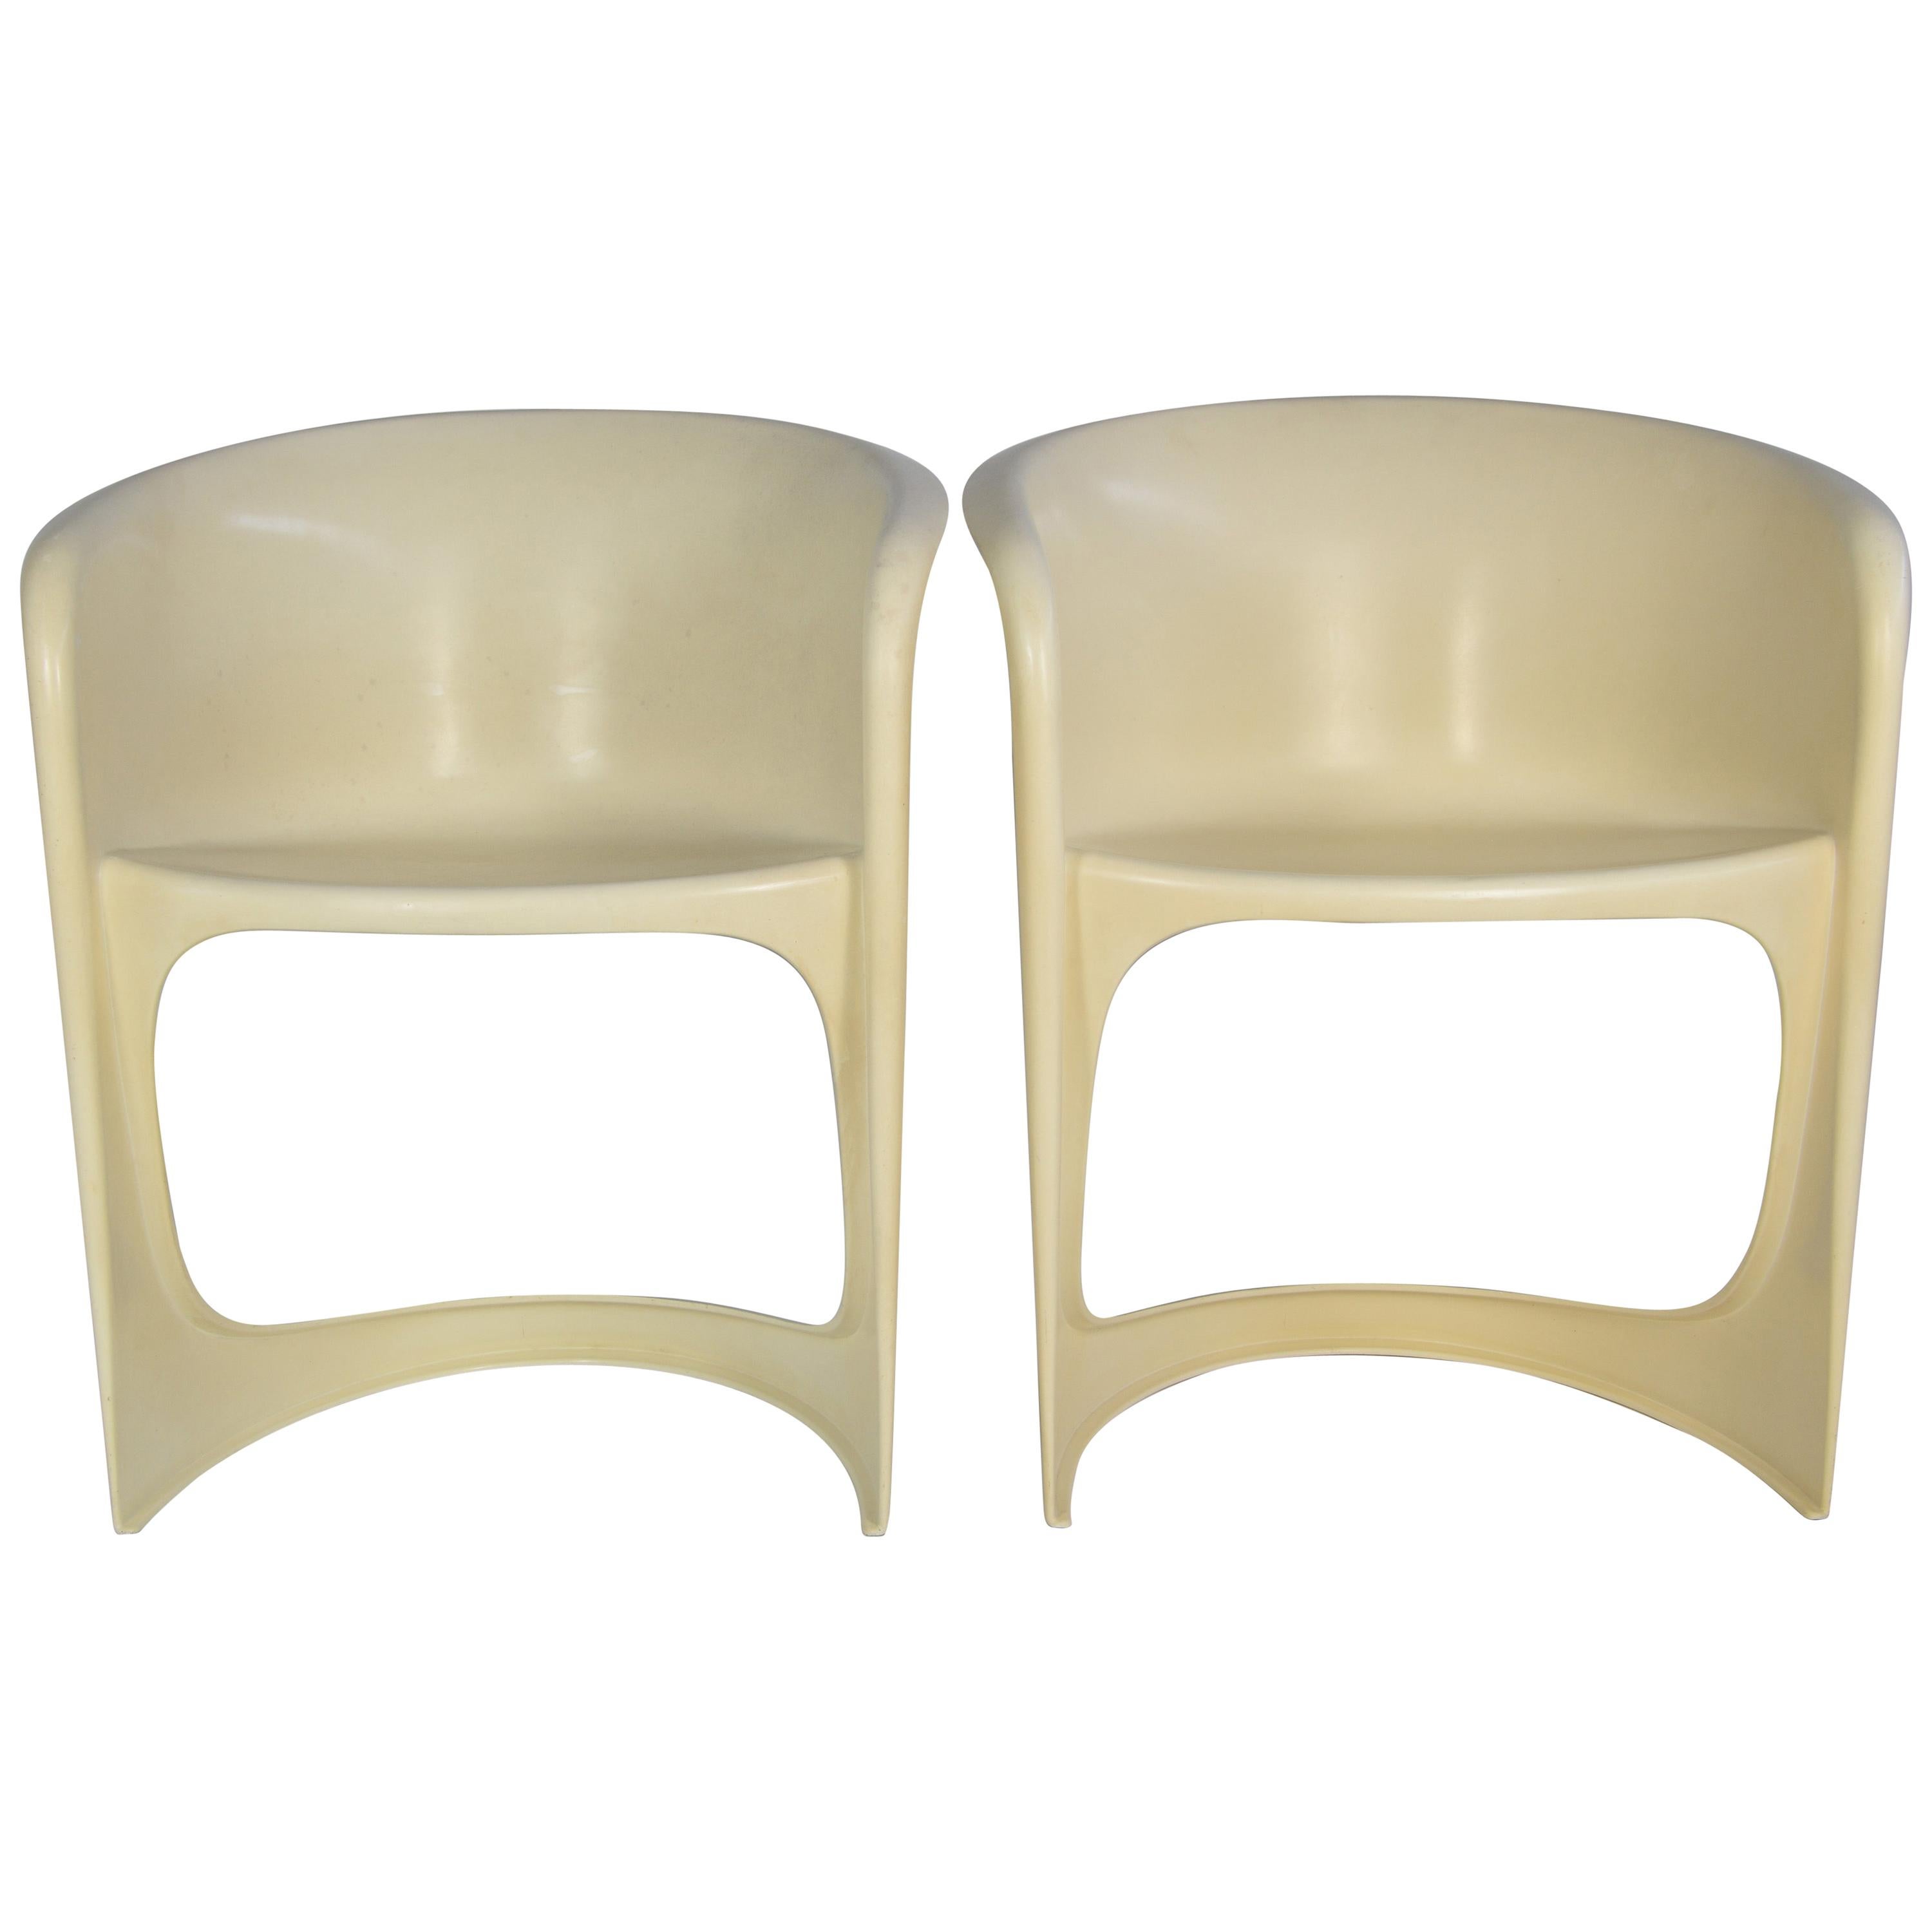 Space Age White Plastic Vintage Chairs by Steen Ostergaard, for Cado, Denmark